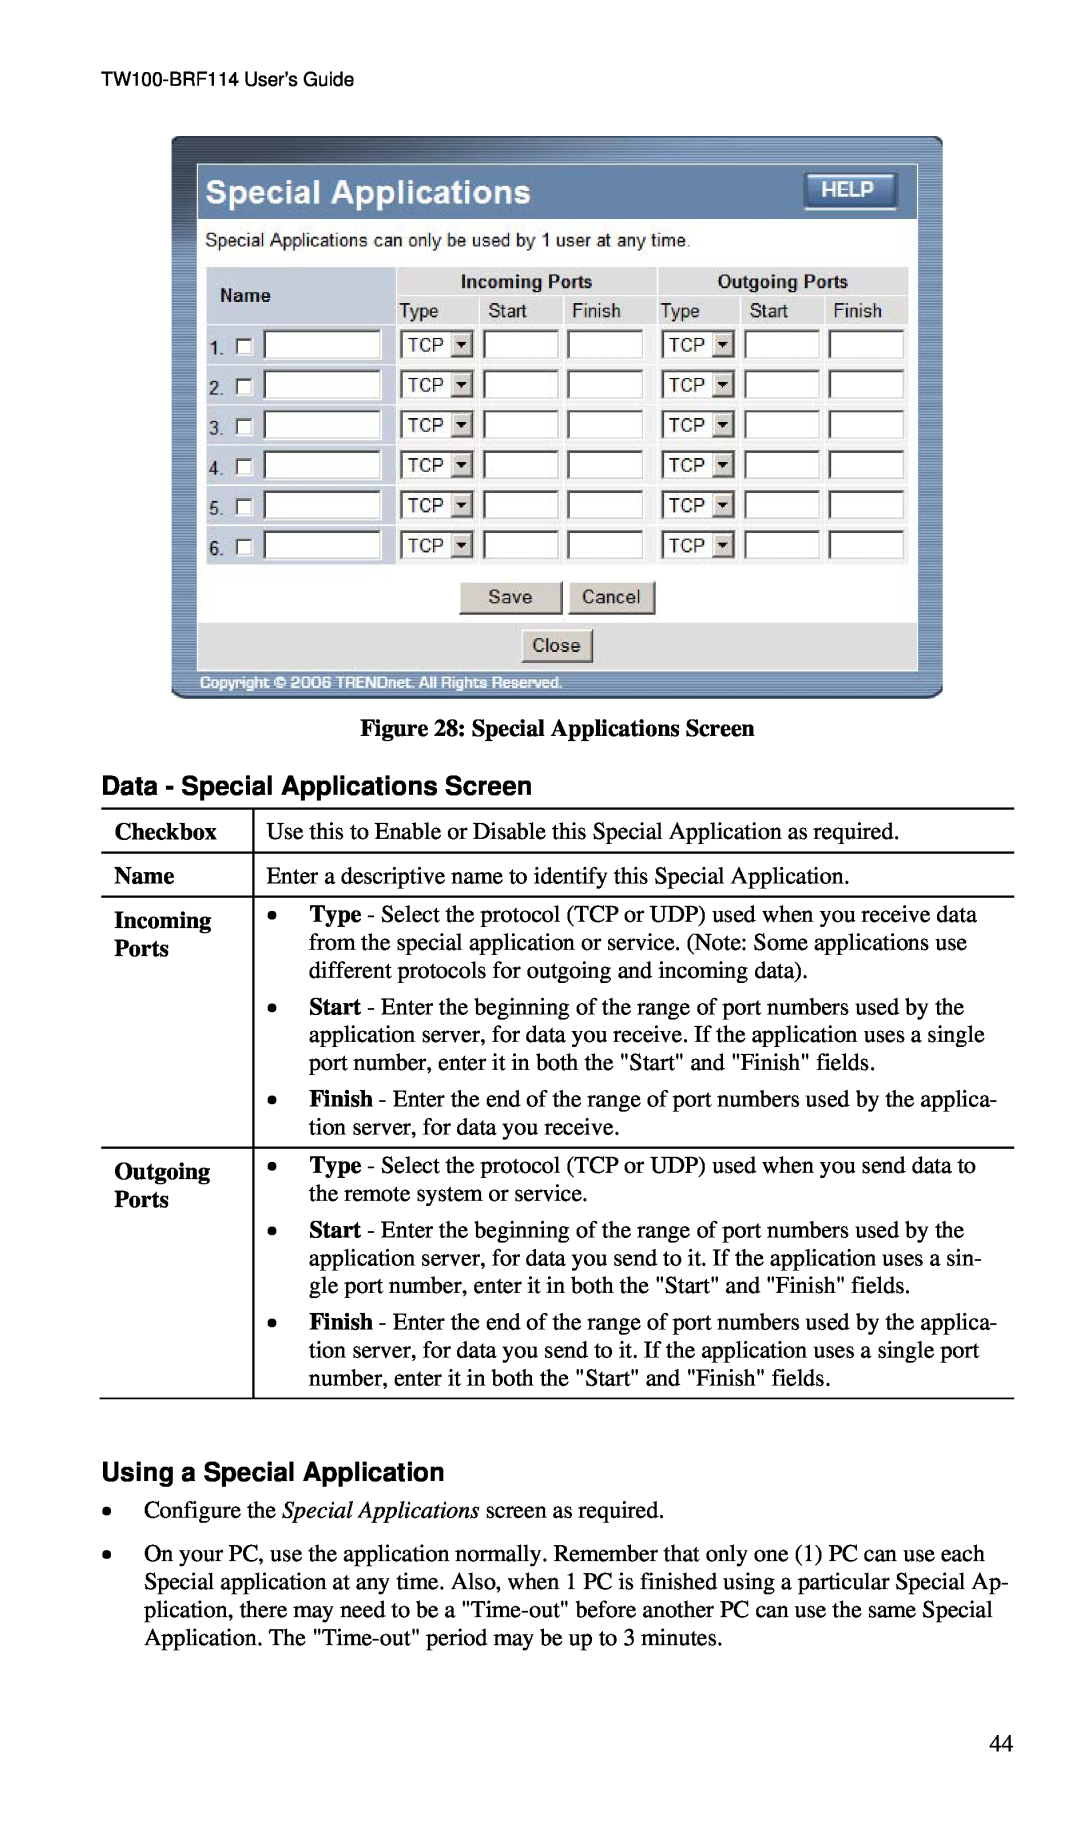 TRENDnet BRF114 manual Data - Special Applications Screen, Using a Special Application 